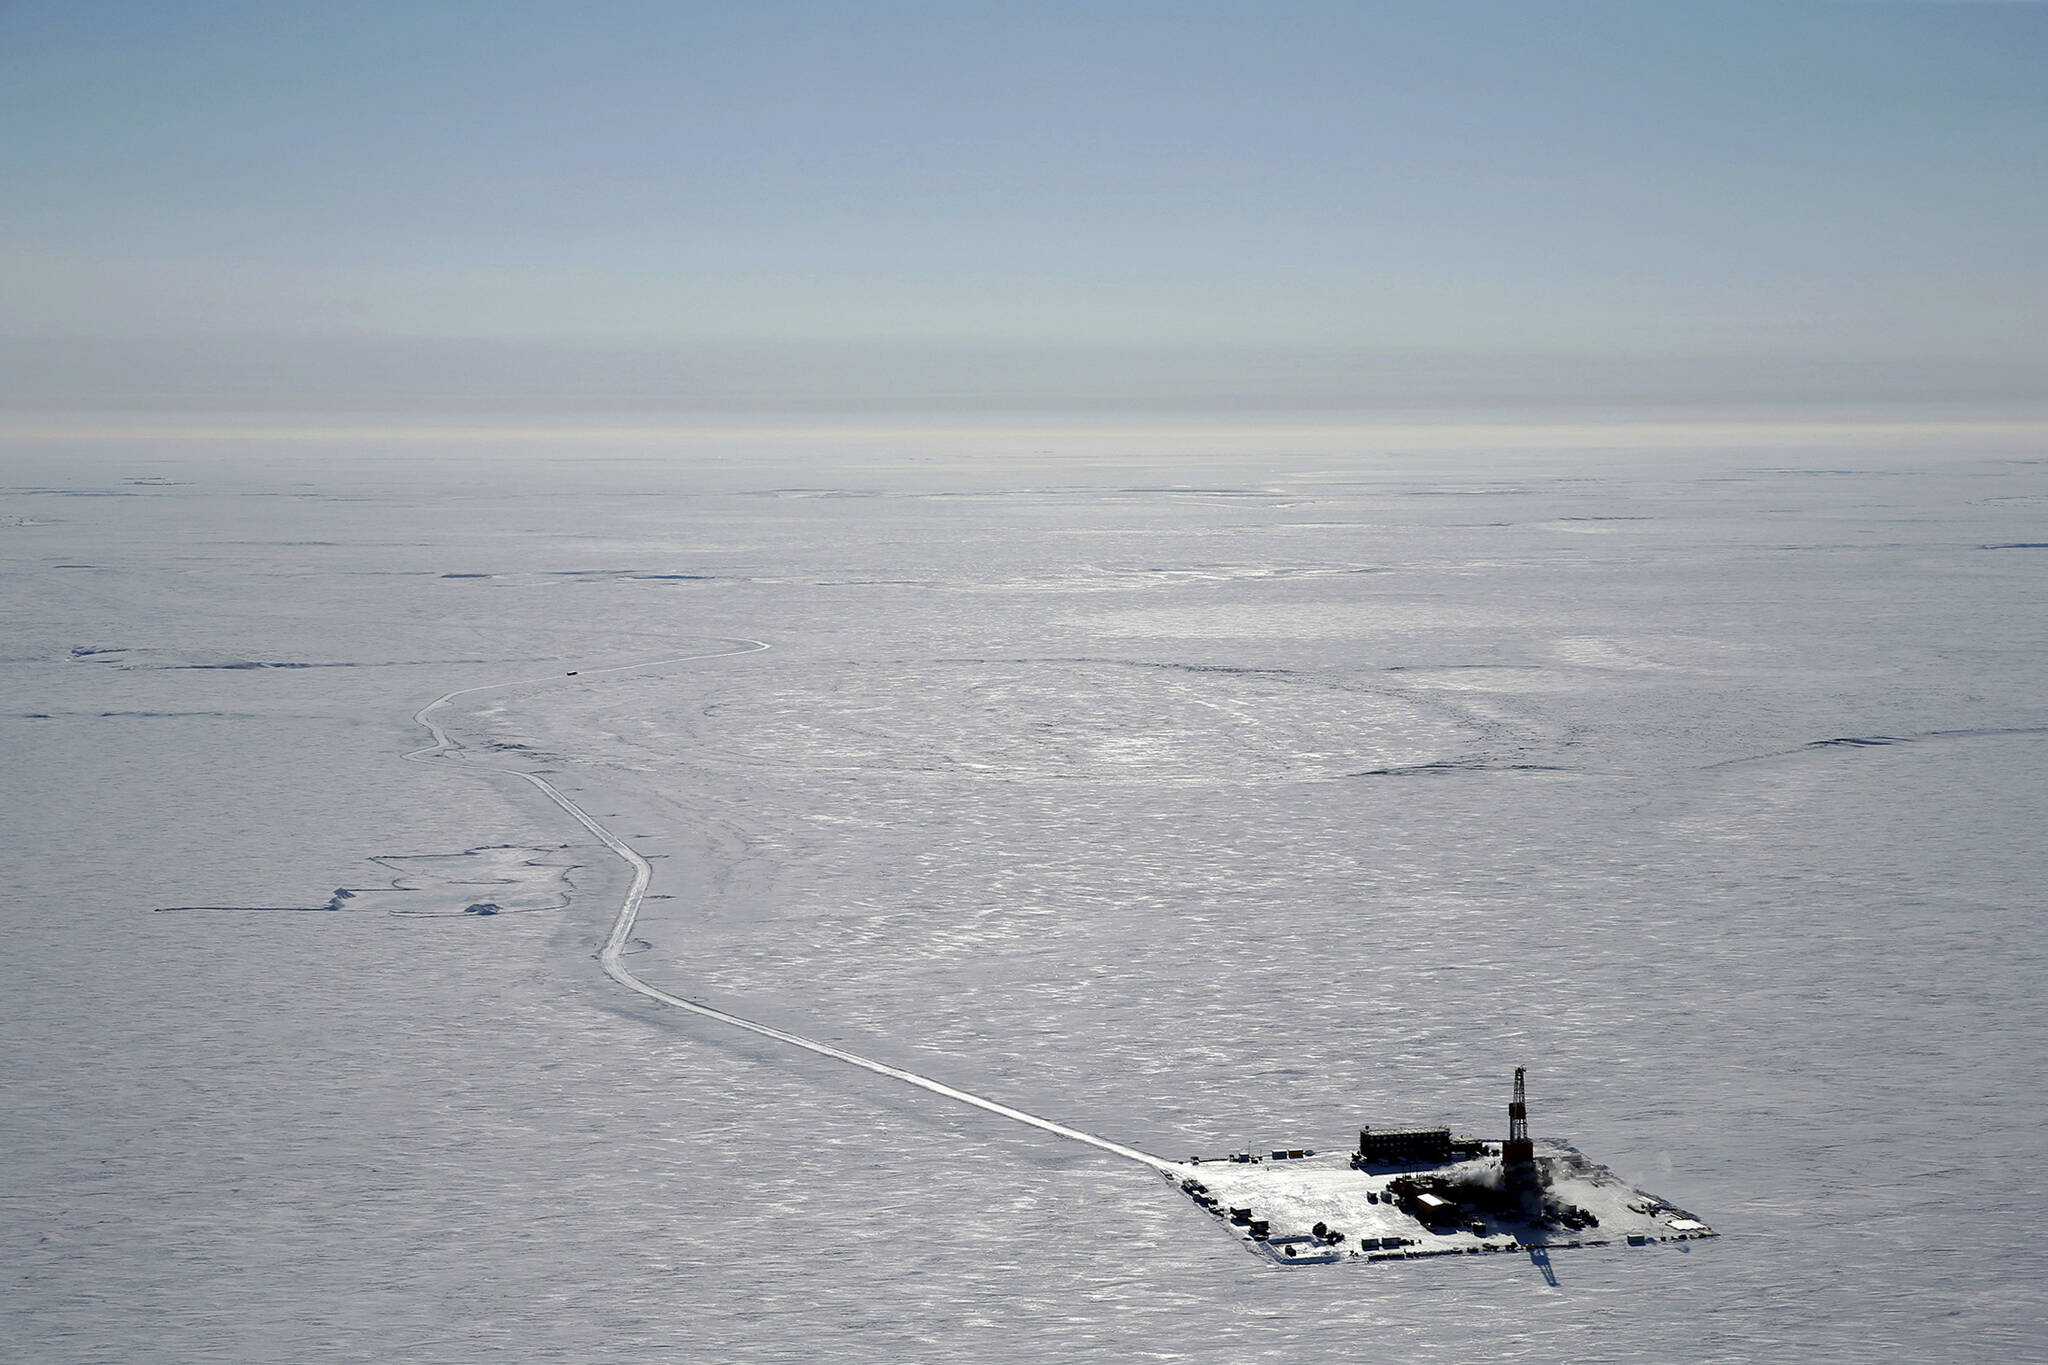 This 2019 aerial photo provided by ConocoPhillips shows an exploratory drilling camp at the proposed site of the Willow oil project on Alaska’s North Slope. President Joe Biden will prevent or limit oil drilling in 16 million acres of Alaska and the Arctic Ocean, an administration official said on Sunday, March 12, 2023. The expected announcement comes as regulators prepare to announce a final decision on the controversial Willow project. (ConocoPhillips)